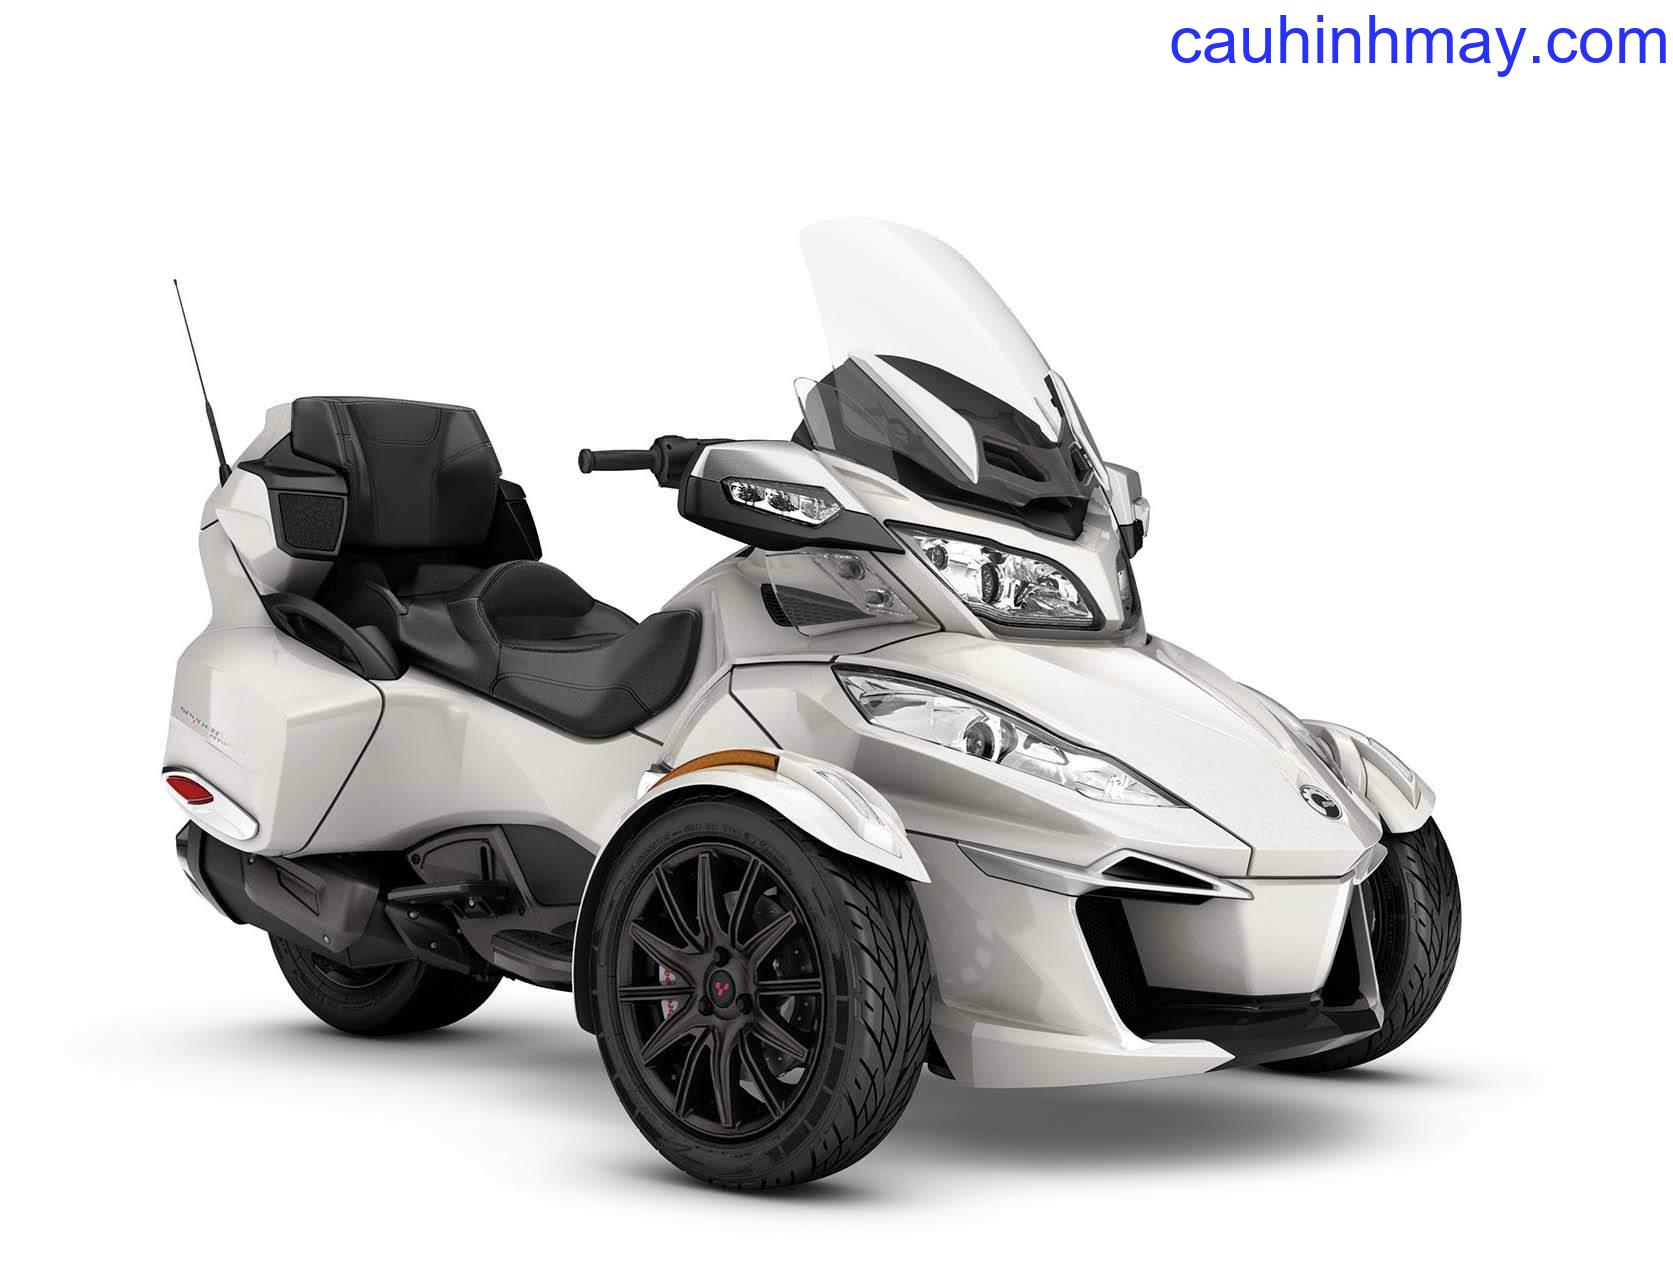 CAN-AM SPYDER RT -S - cauhinhmay.com